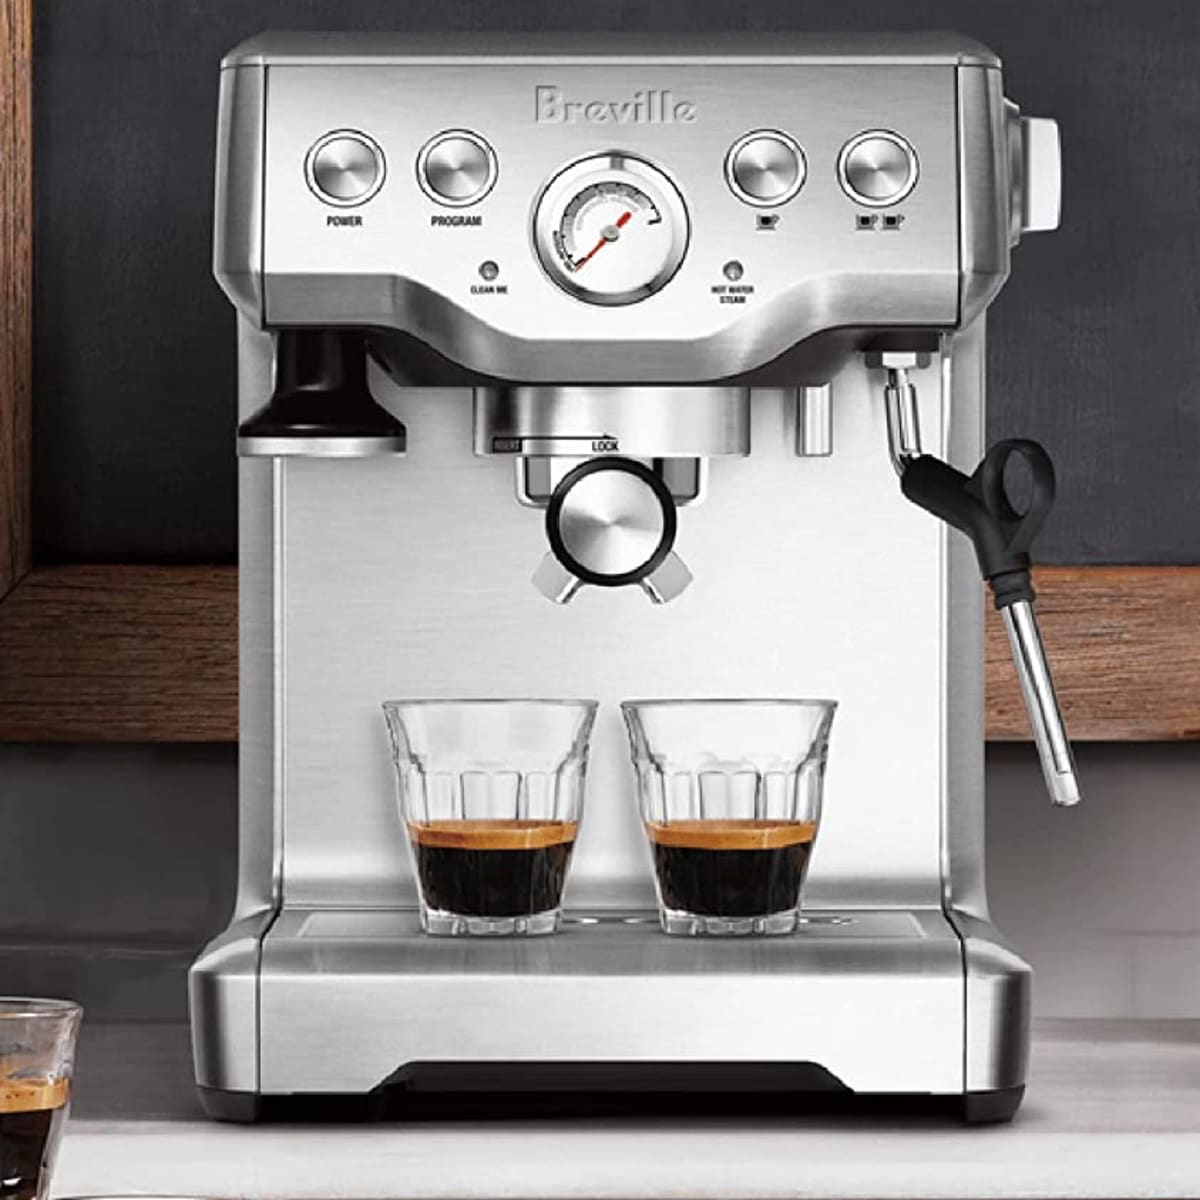 Save $150 On This Breville Espresso Machine Ahead of  Prime Day -  TheStreet